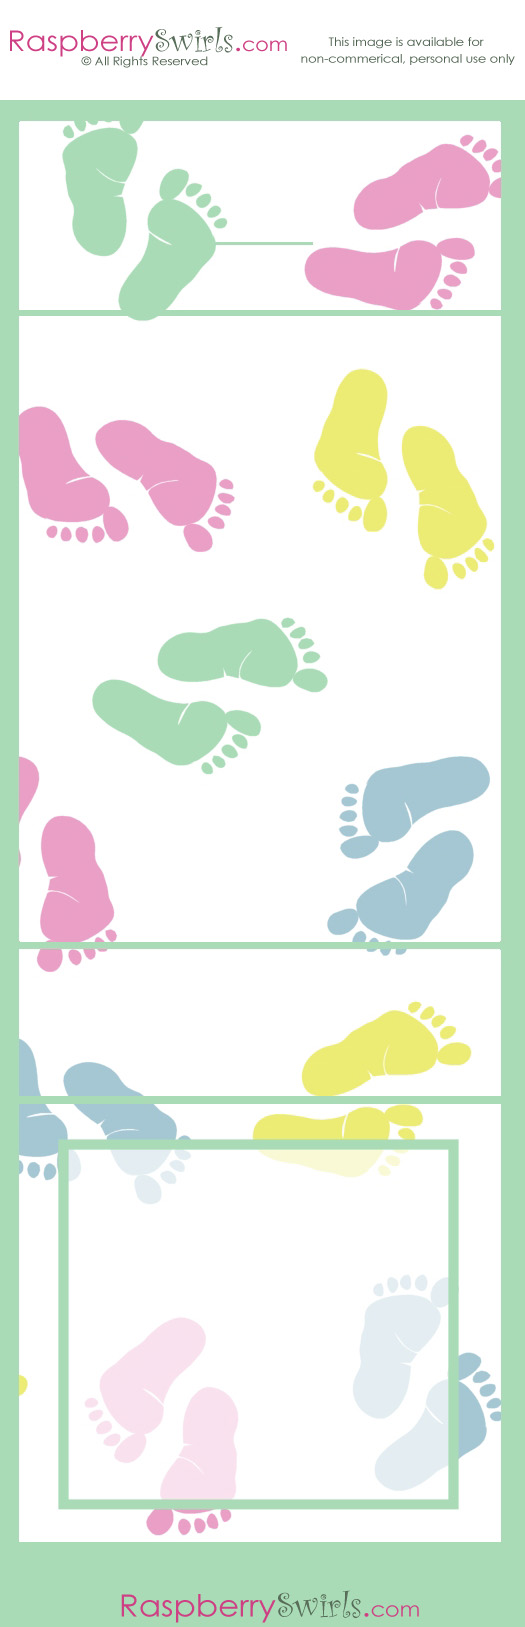 Free Baby Feet Printable Candy Wrappers, Invitations and more ...